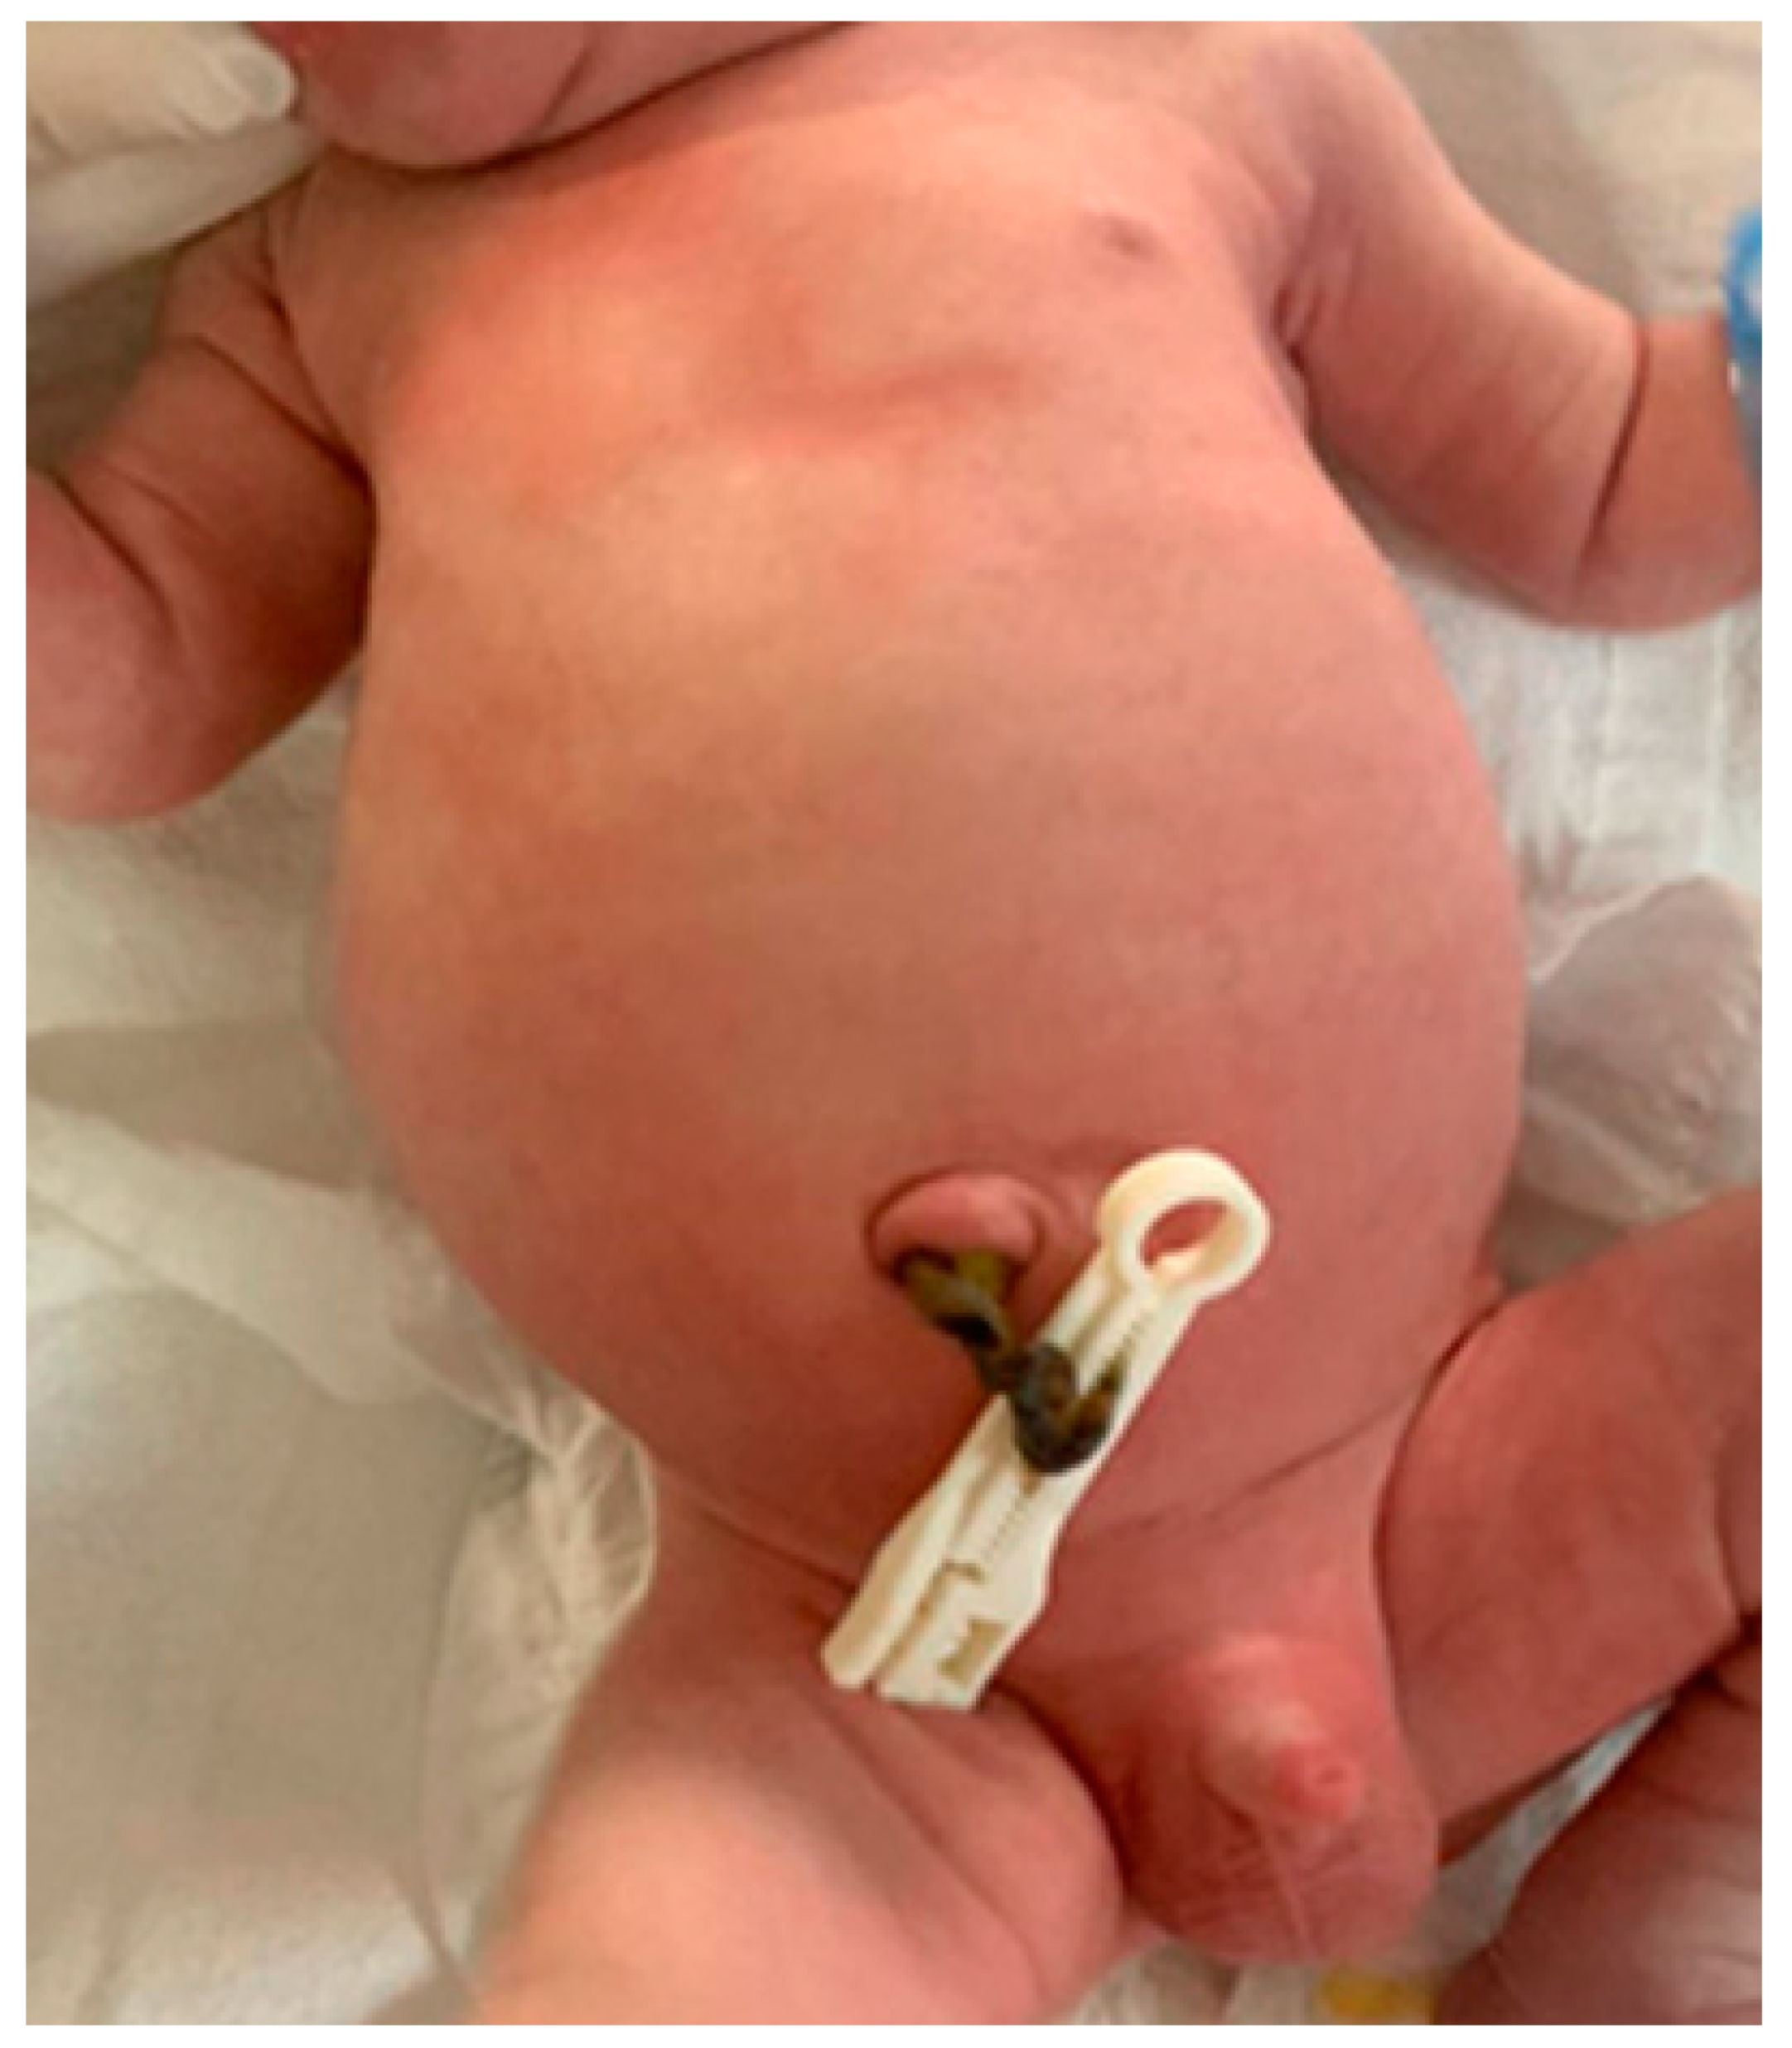 Icterus, ascites, and umbilical hernia in a child with idiopathic